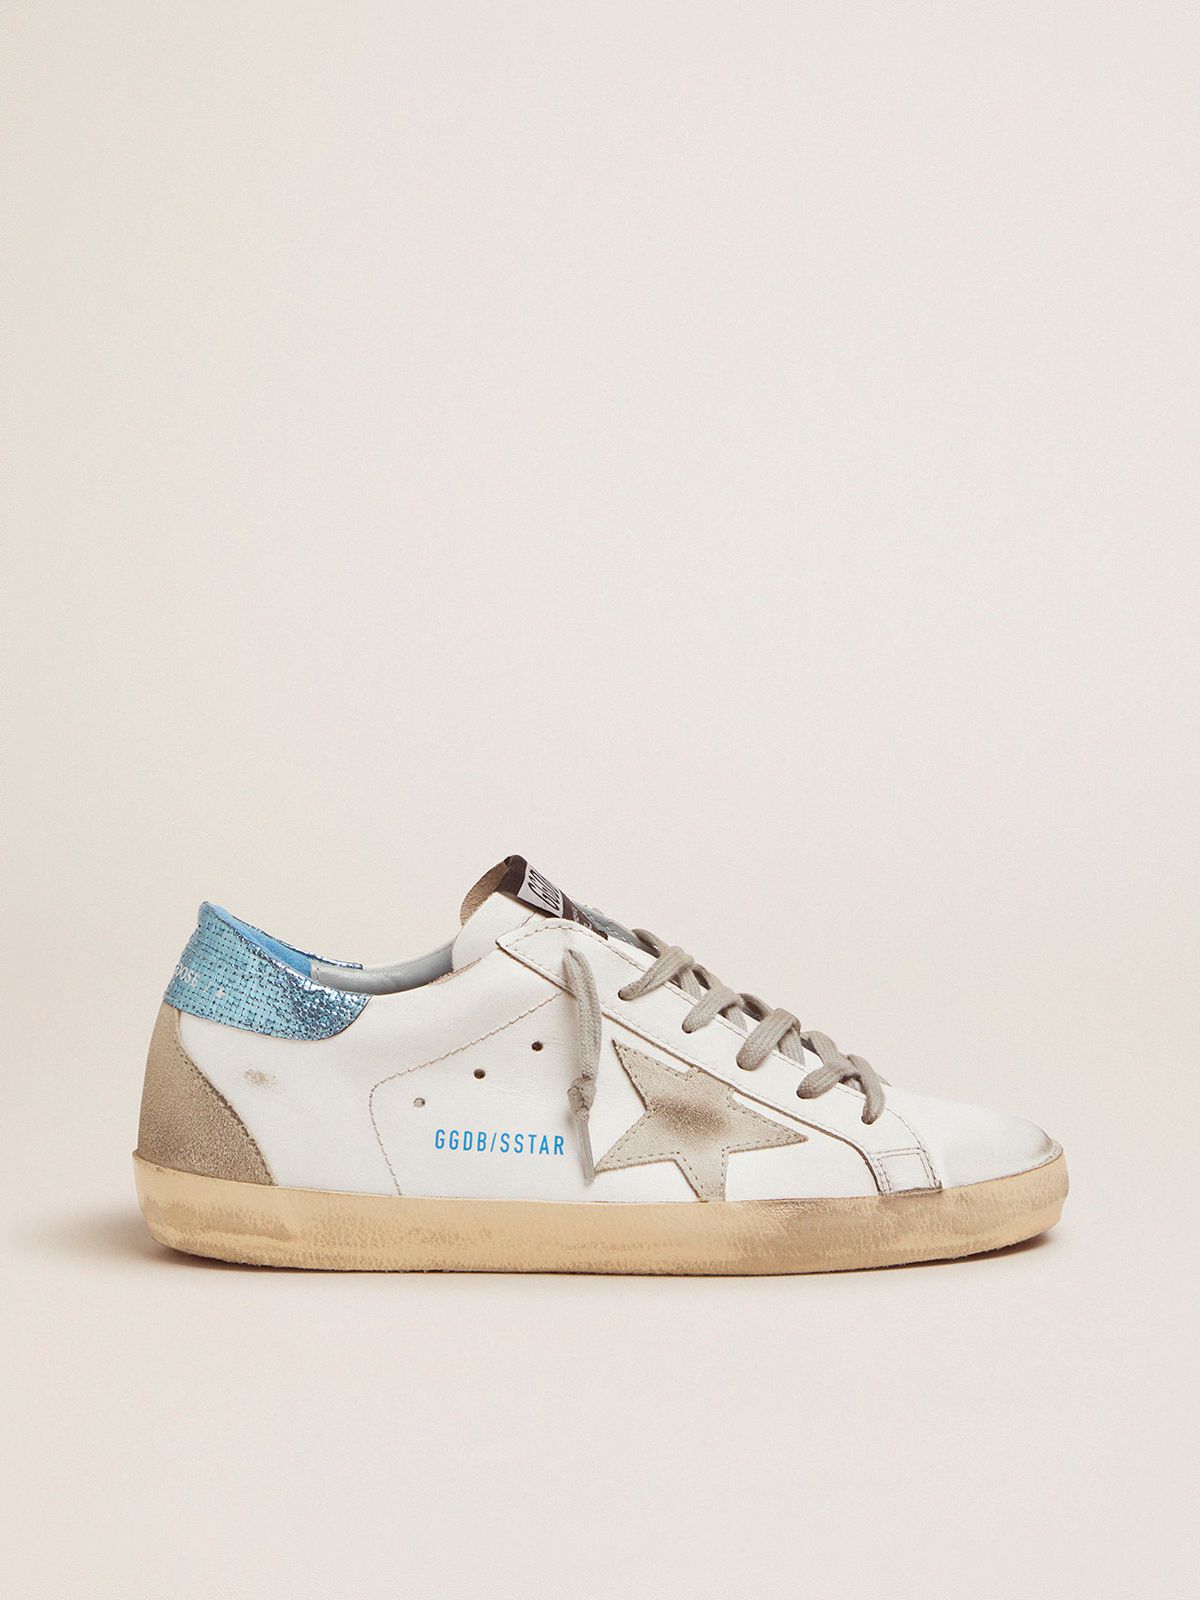 golden goose sneakers with blue laminated tab Super-Star heel White LTD